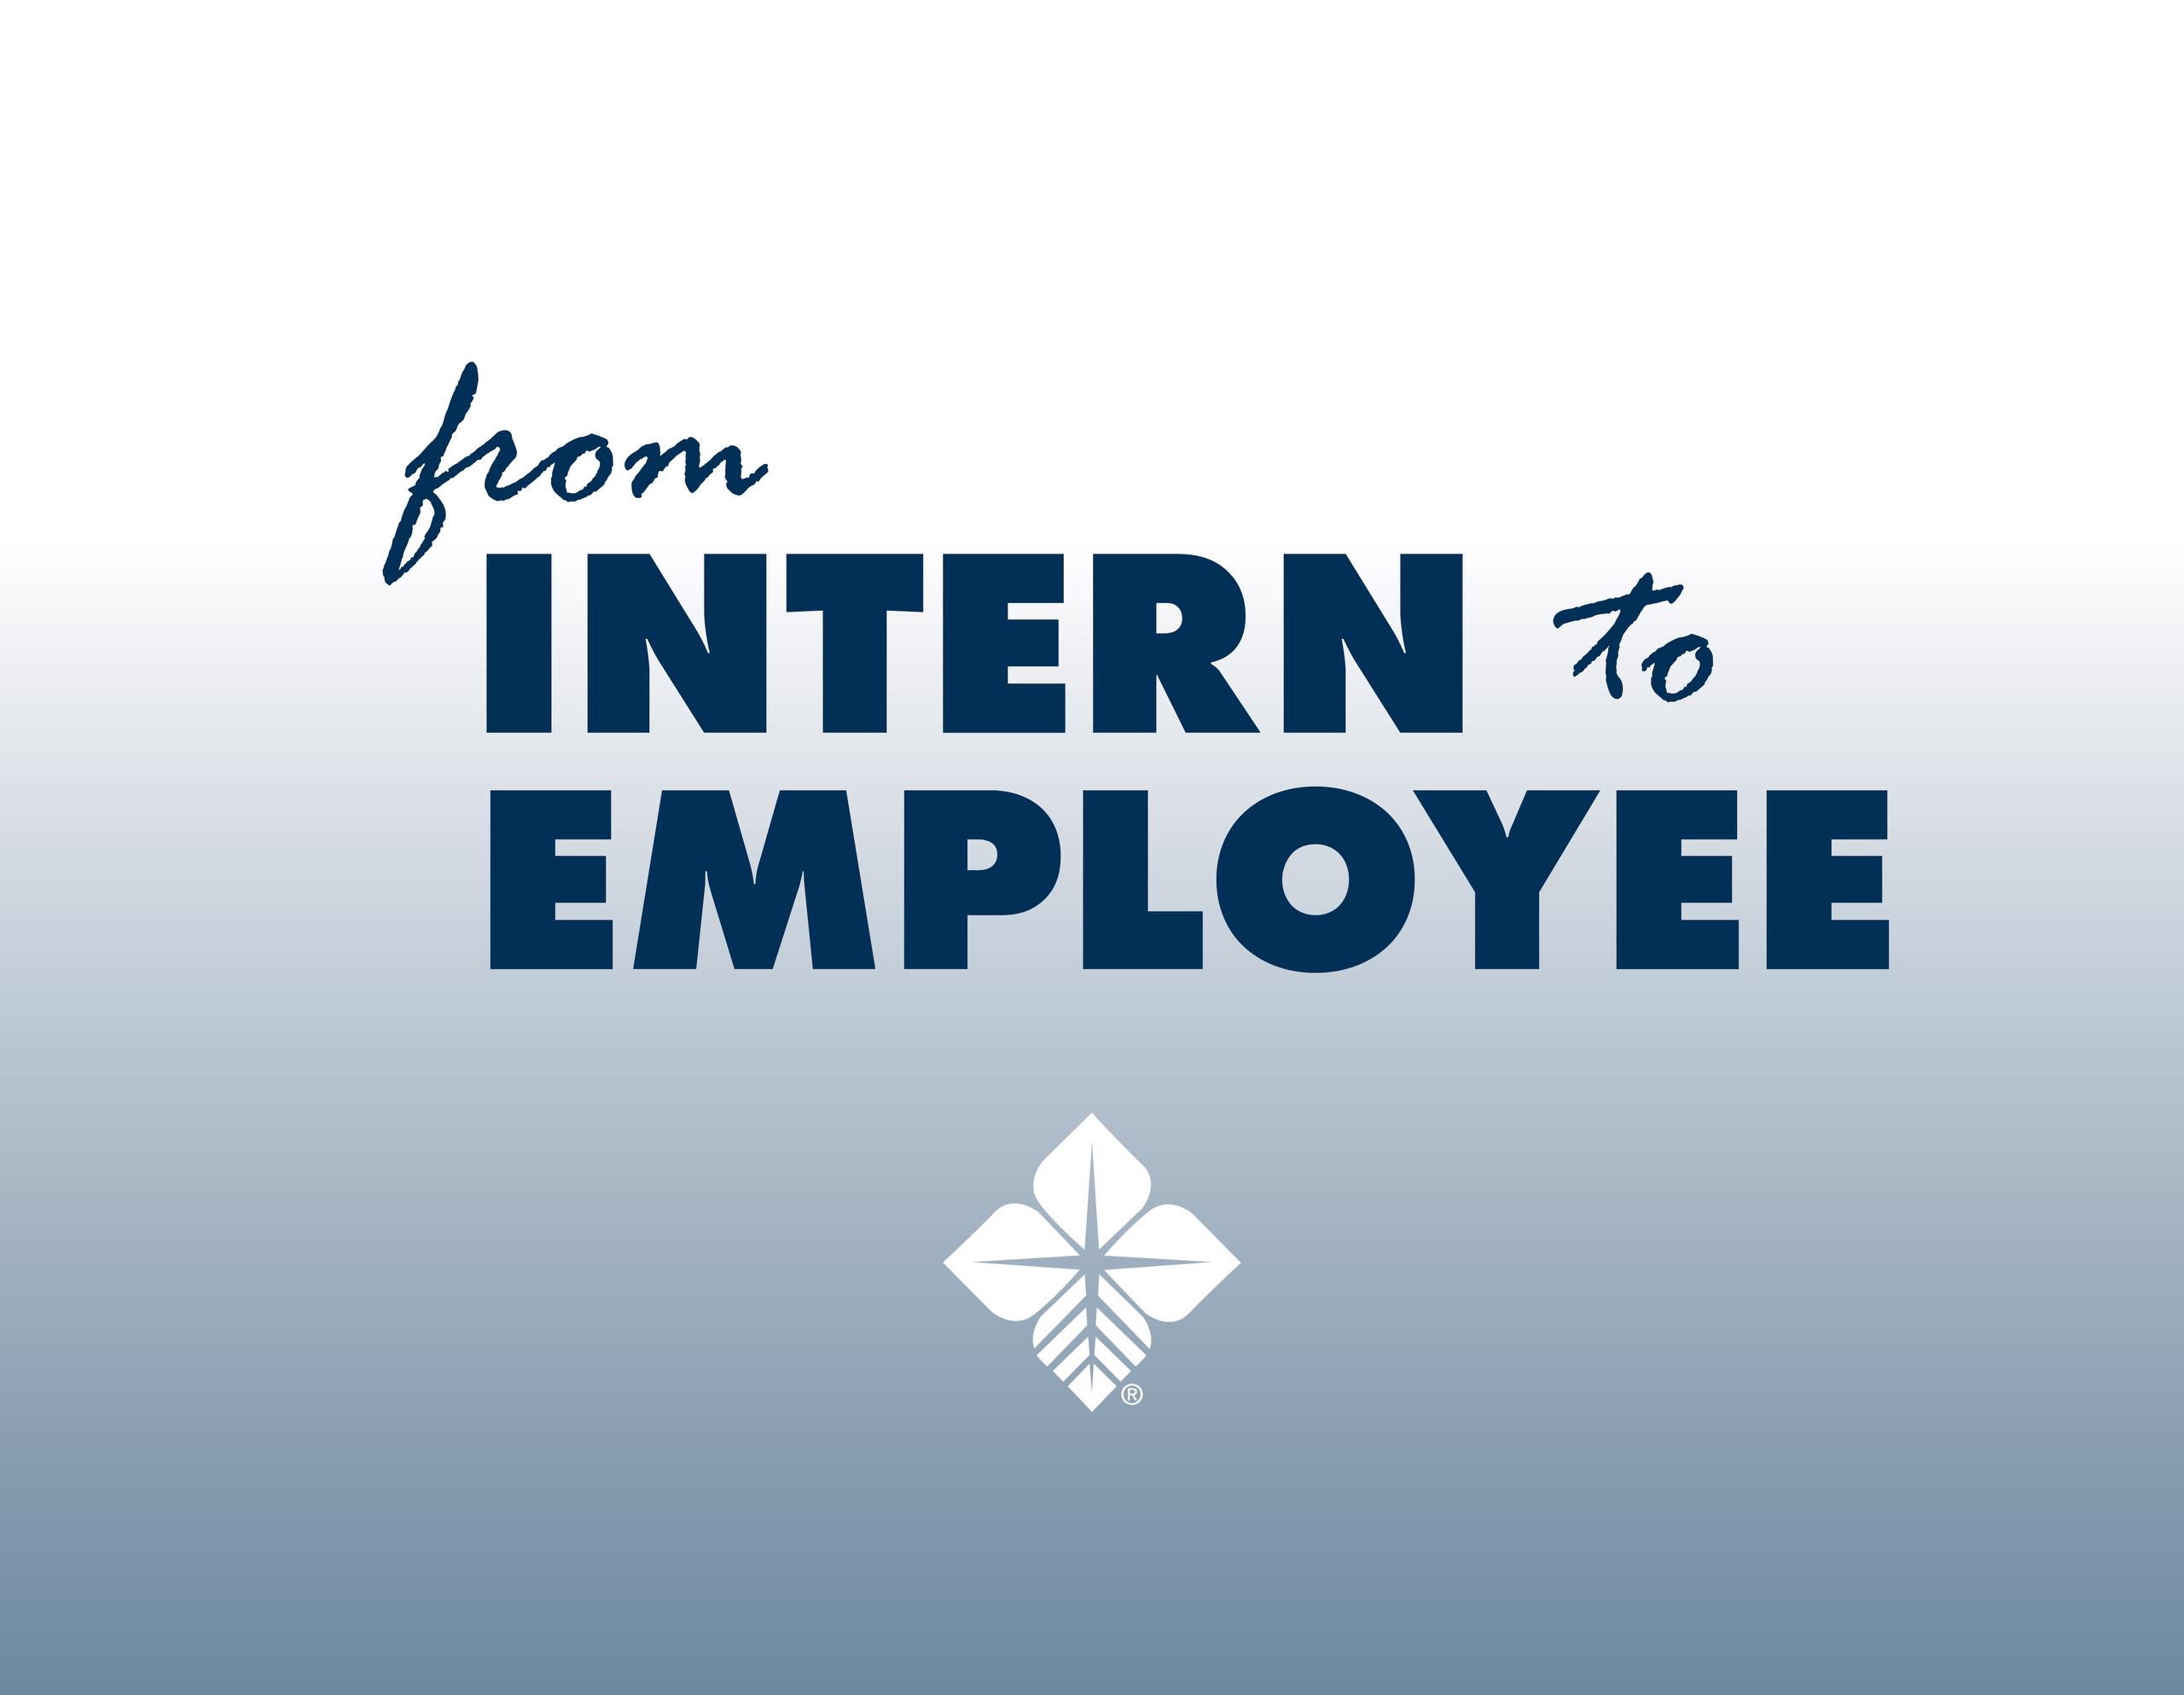 From intern to employee